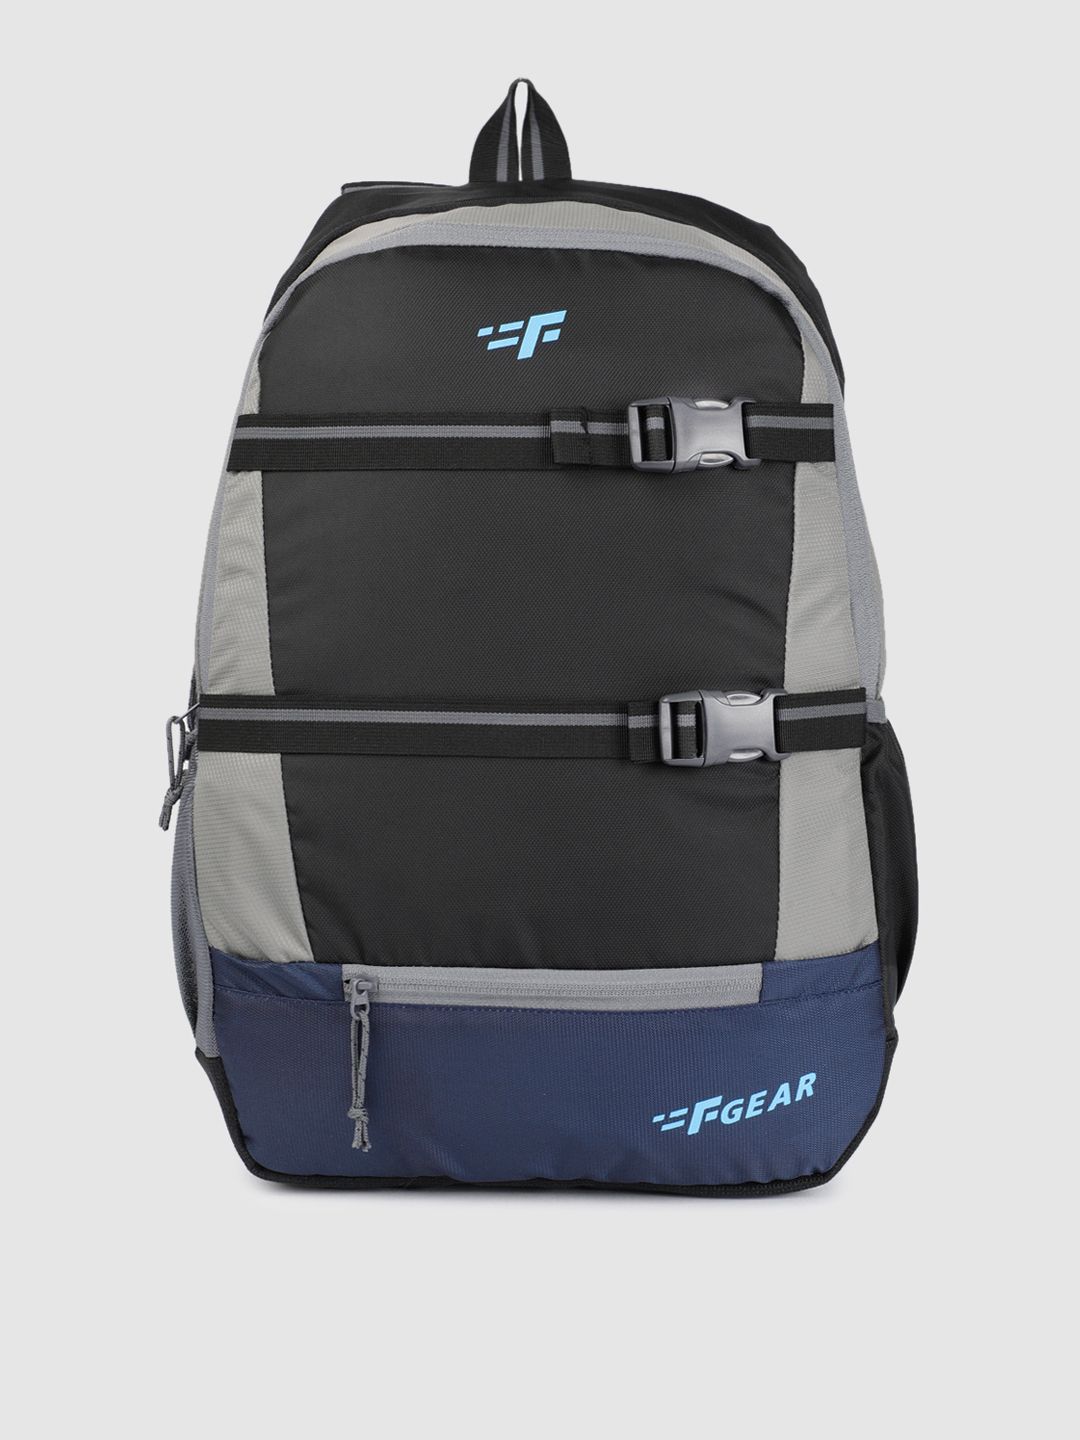 F Gear Unisex Black & Grey Colourblocked Arrive Backpack Price in India